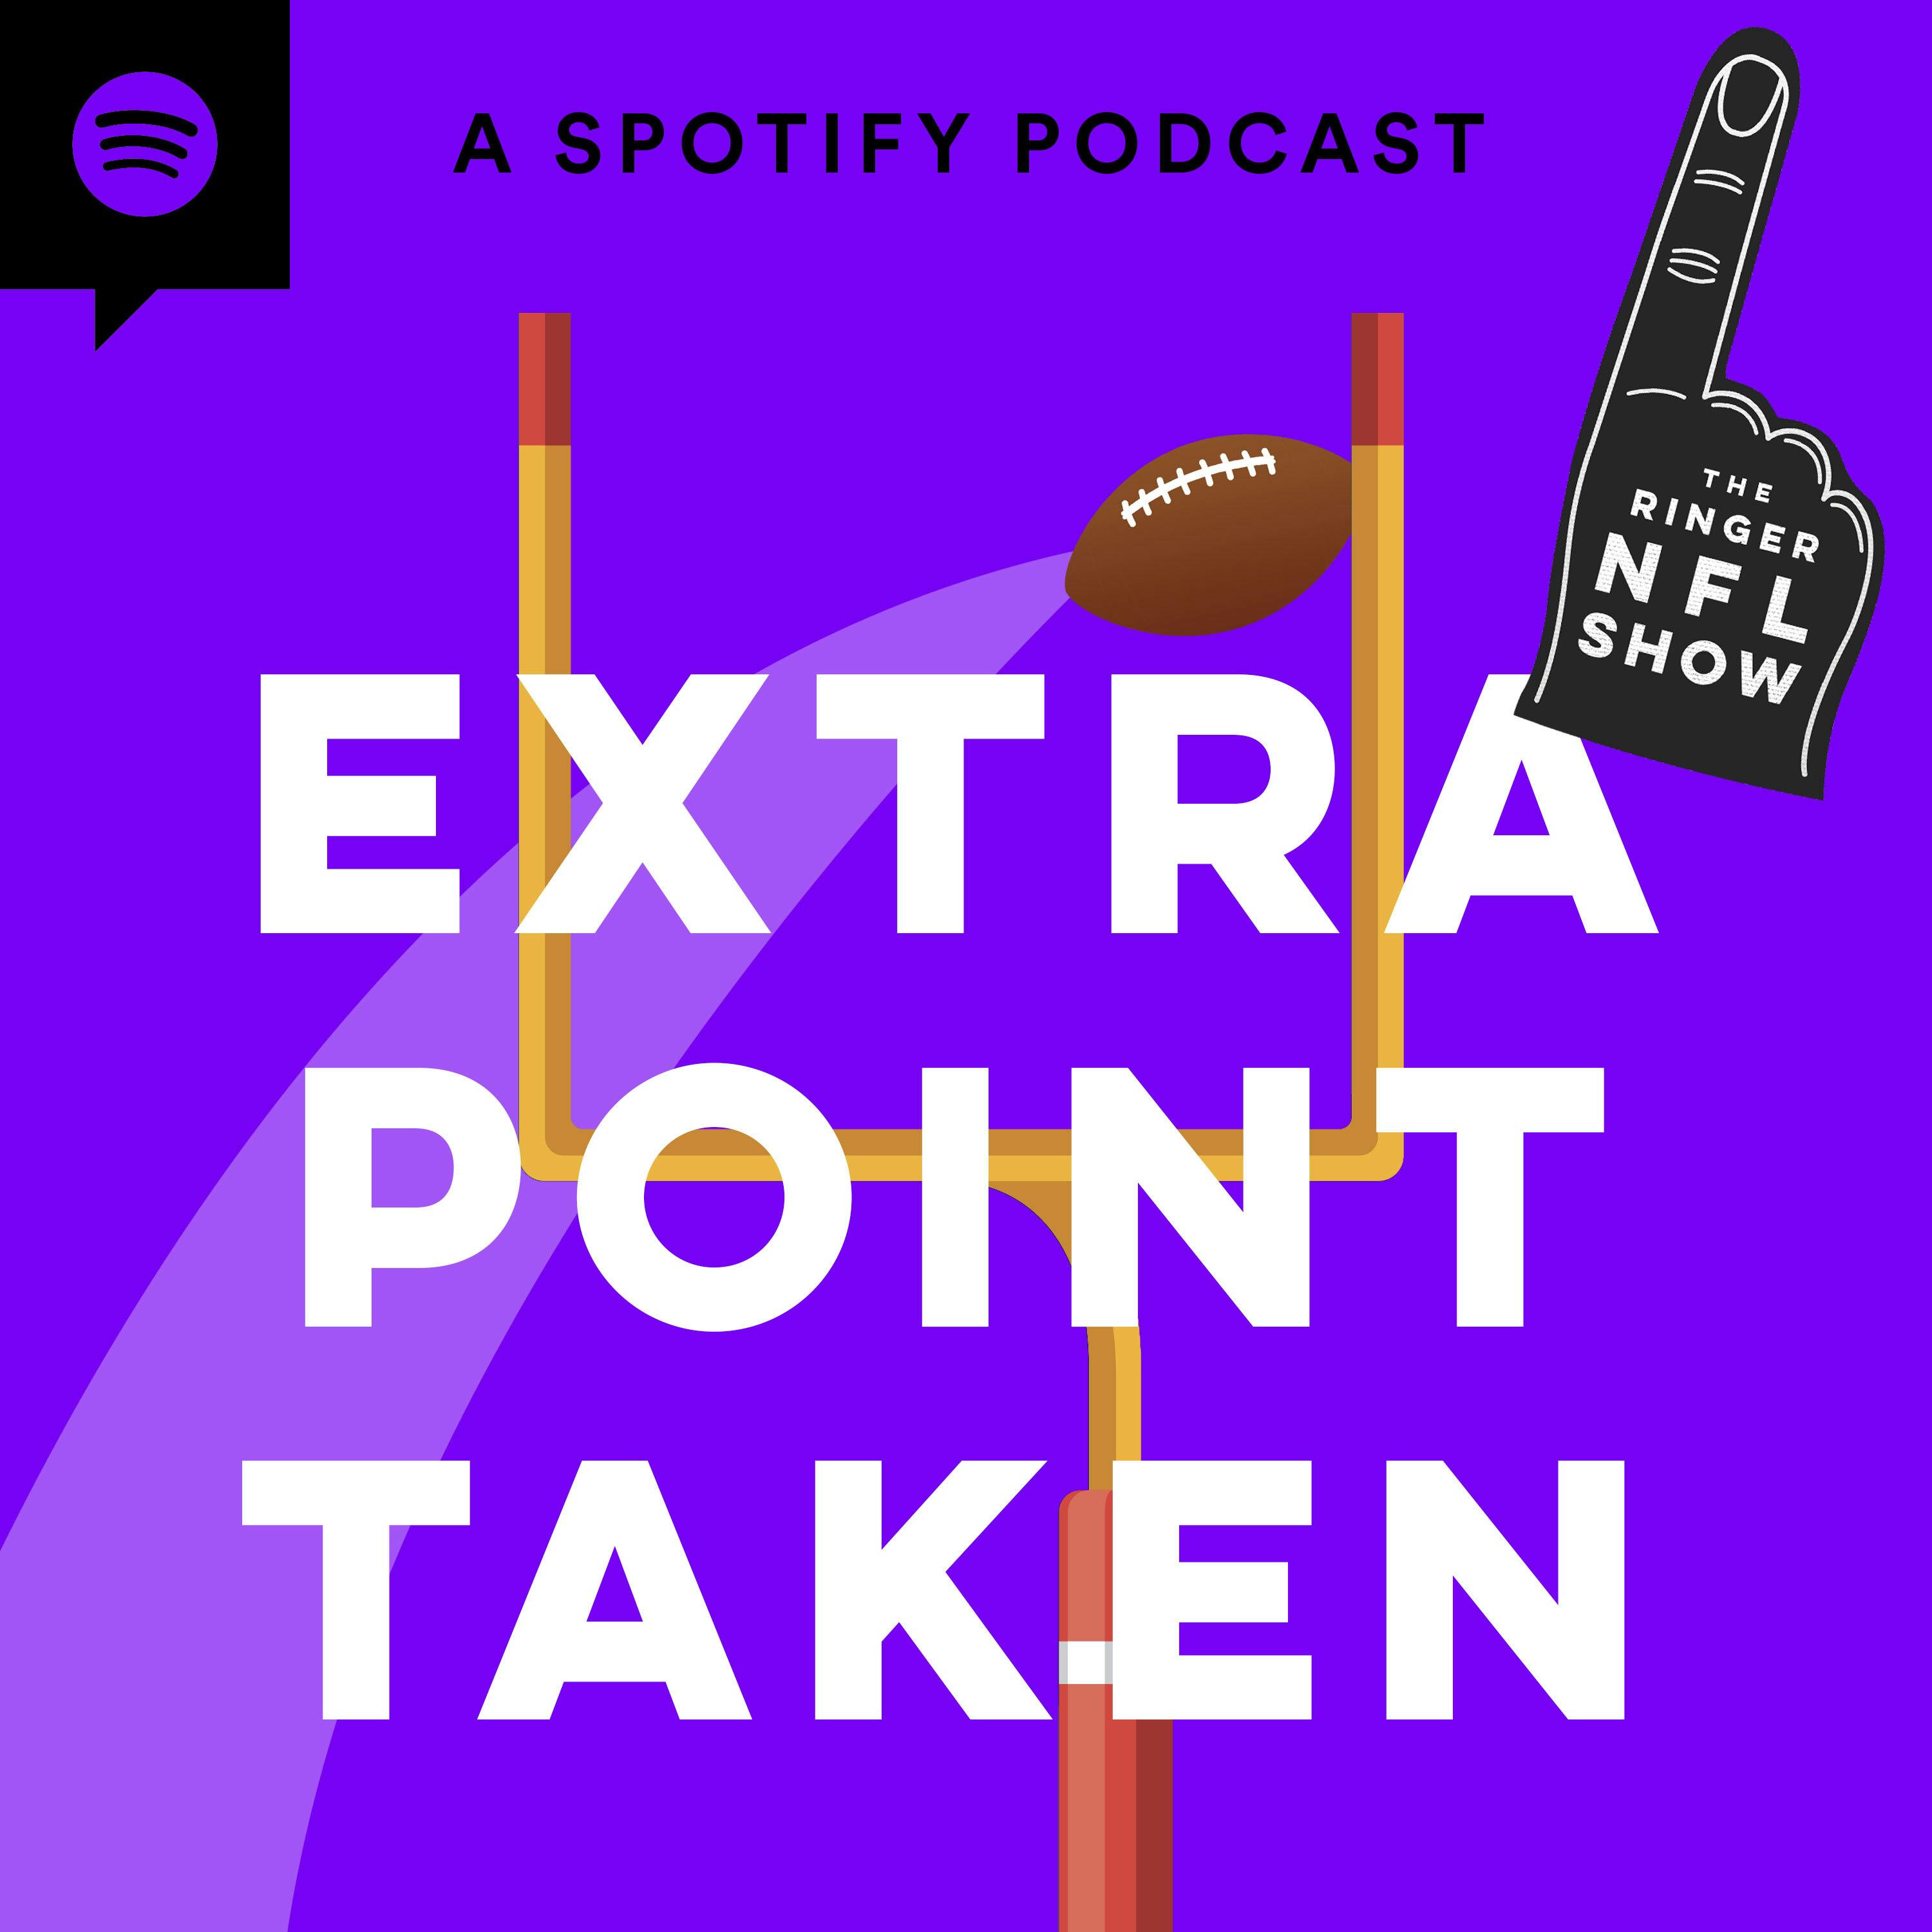 No Team Can Win Like the Ravens, the Chiefs Are Not Winning the Super Bowl This Year, and More Big Takeaways From Week 16 | Extra Point Taken